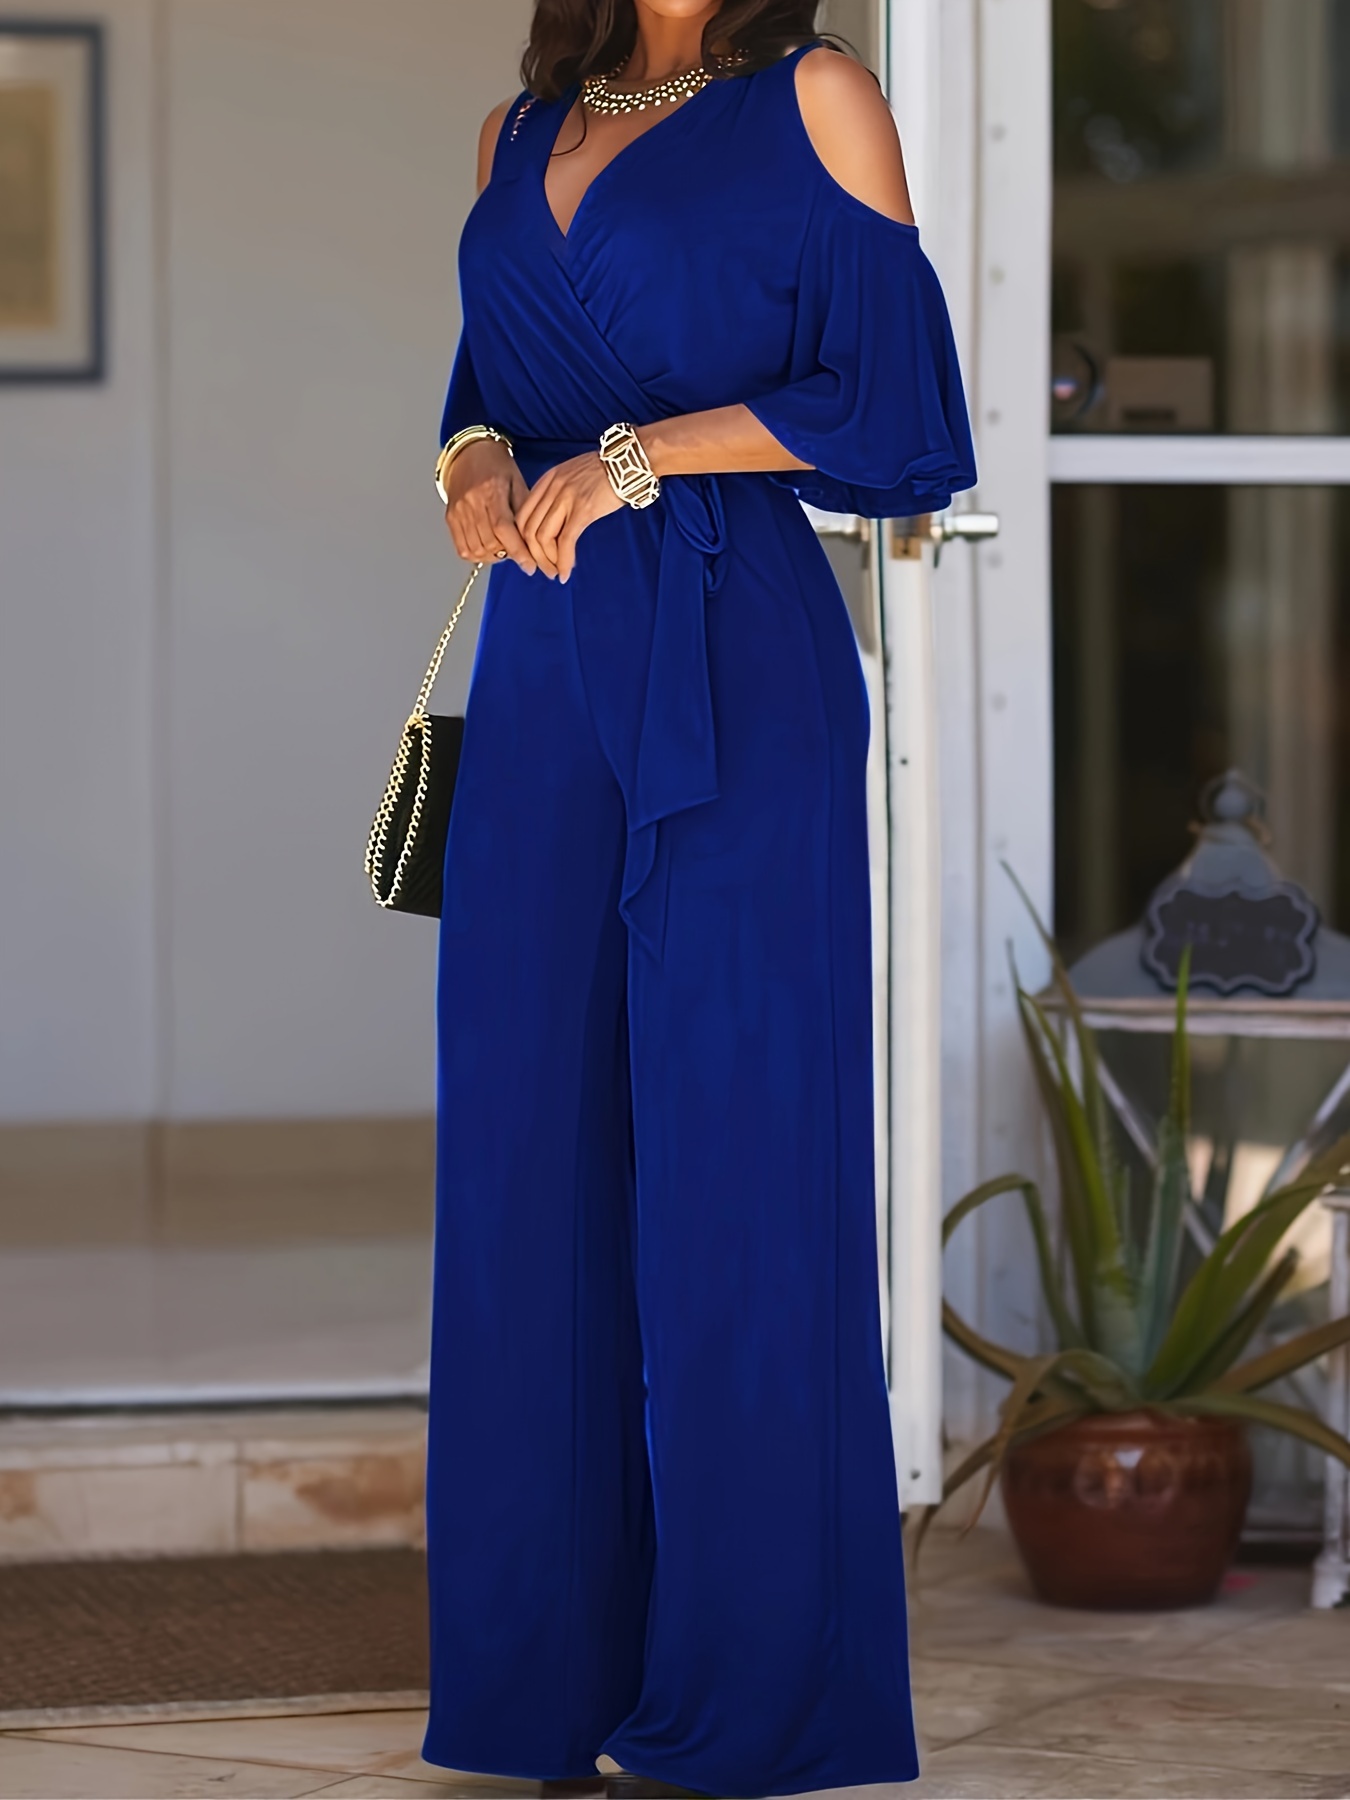  Royal Blue Jumpsuit For Women Short Sleeve Casual V Neck  Belted Wide Leg Formal Rompers Jumpsuits XX-Large